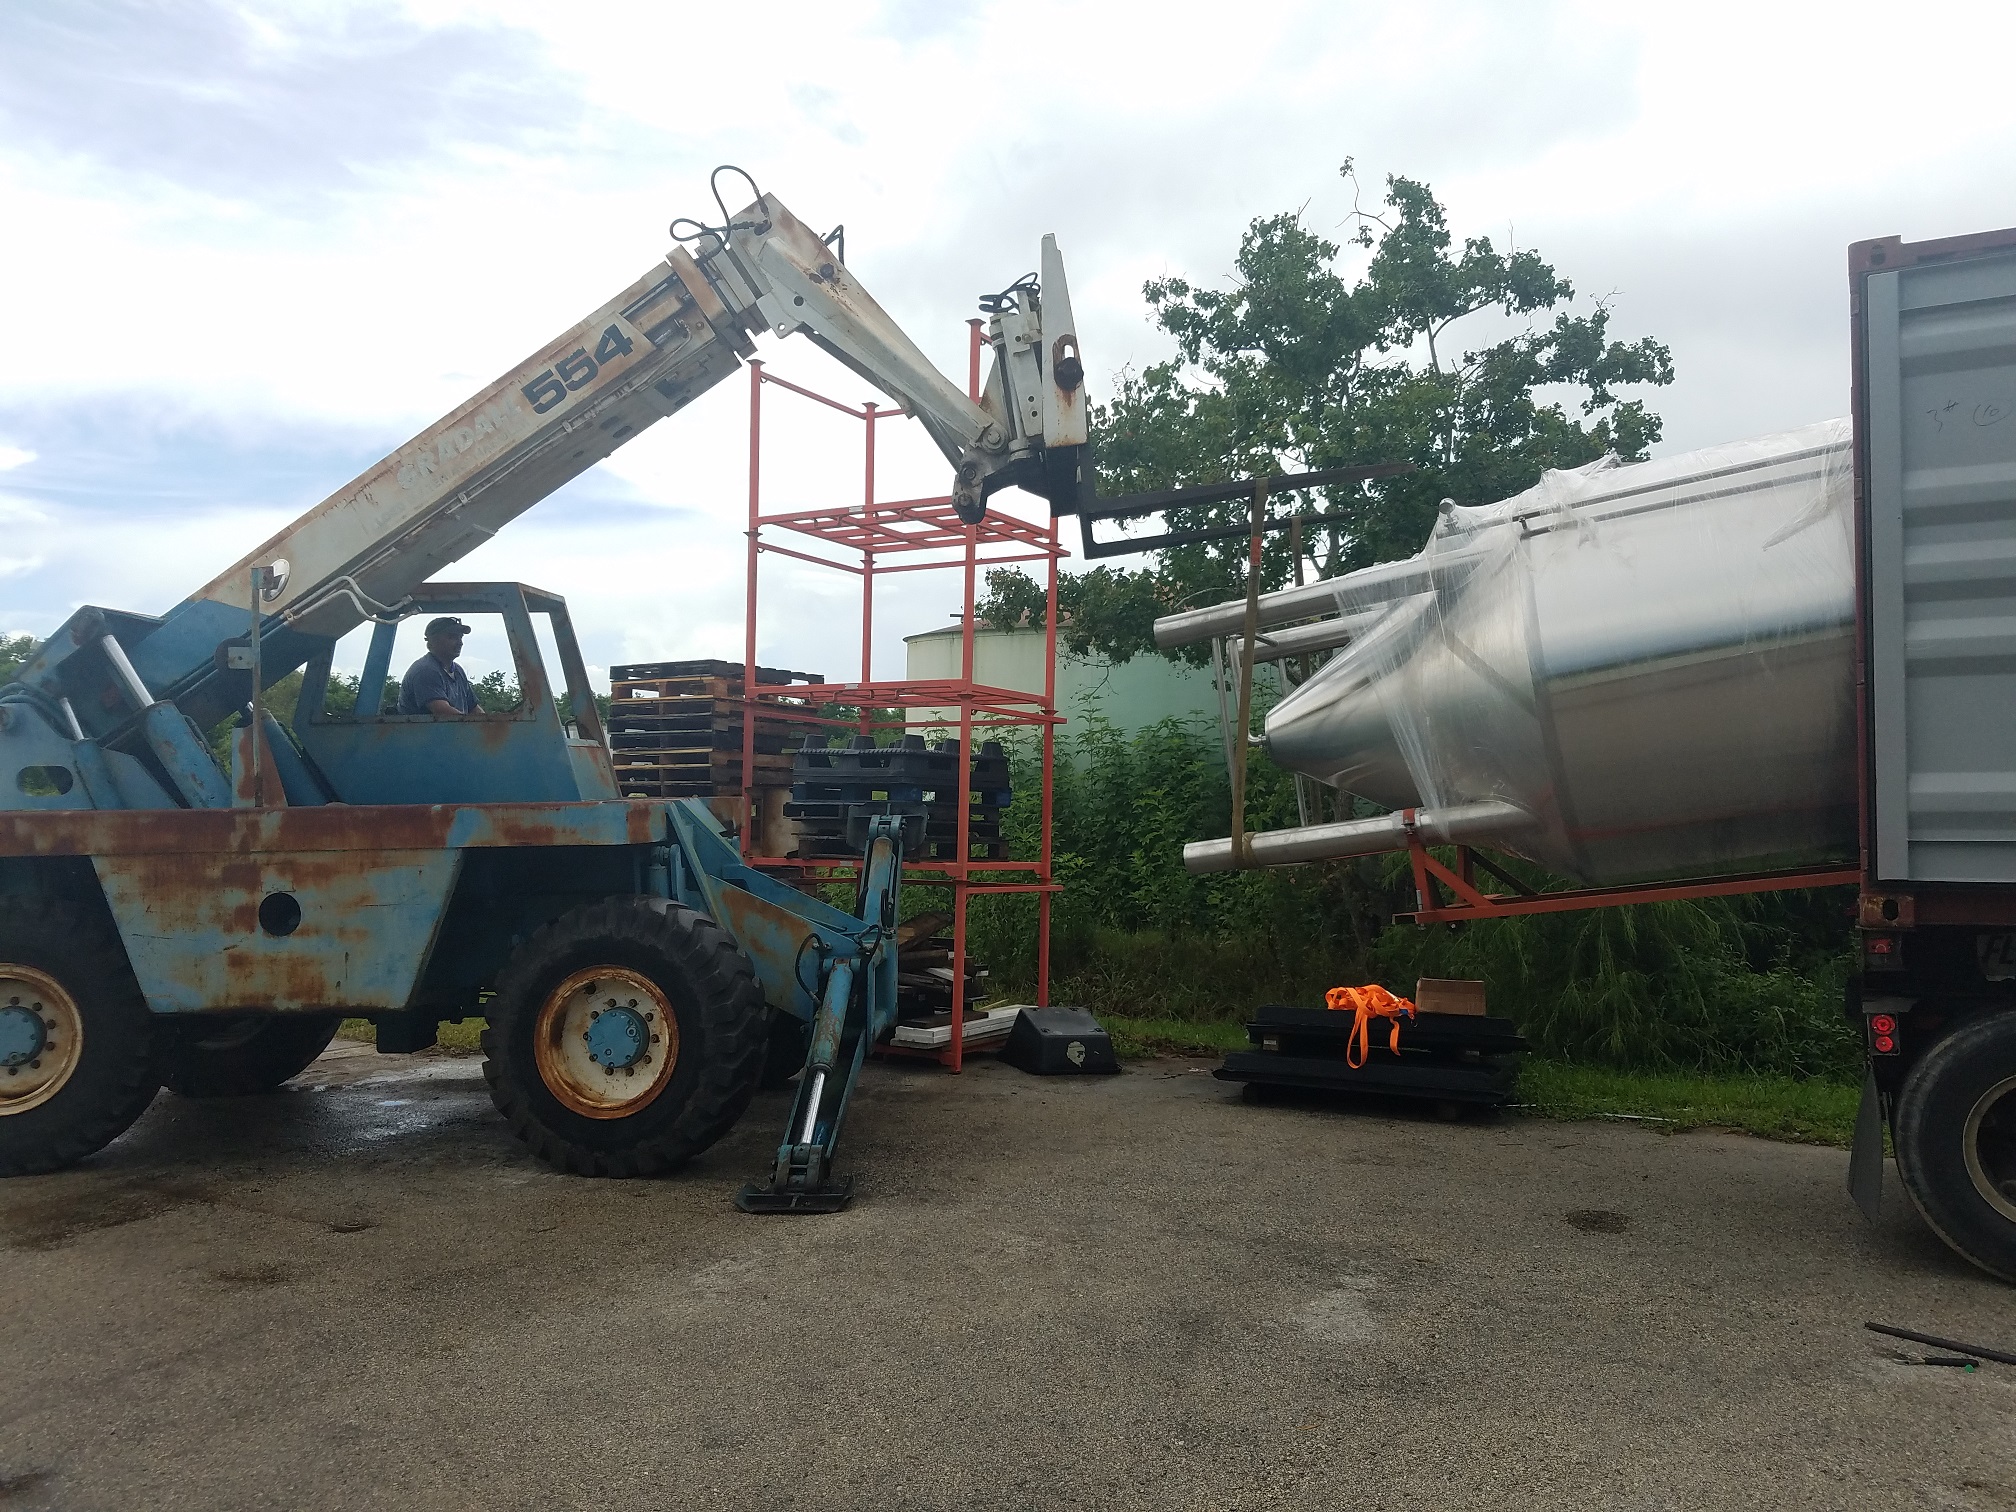 BUILDING A BREWERY: UNLOADING AND POSITIONING YOUR BREWERY EQUIPMENT